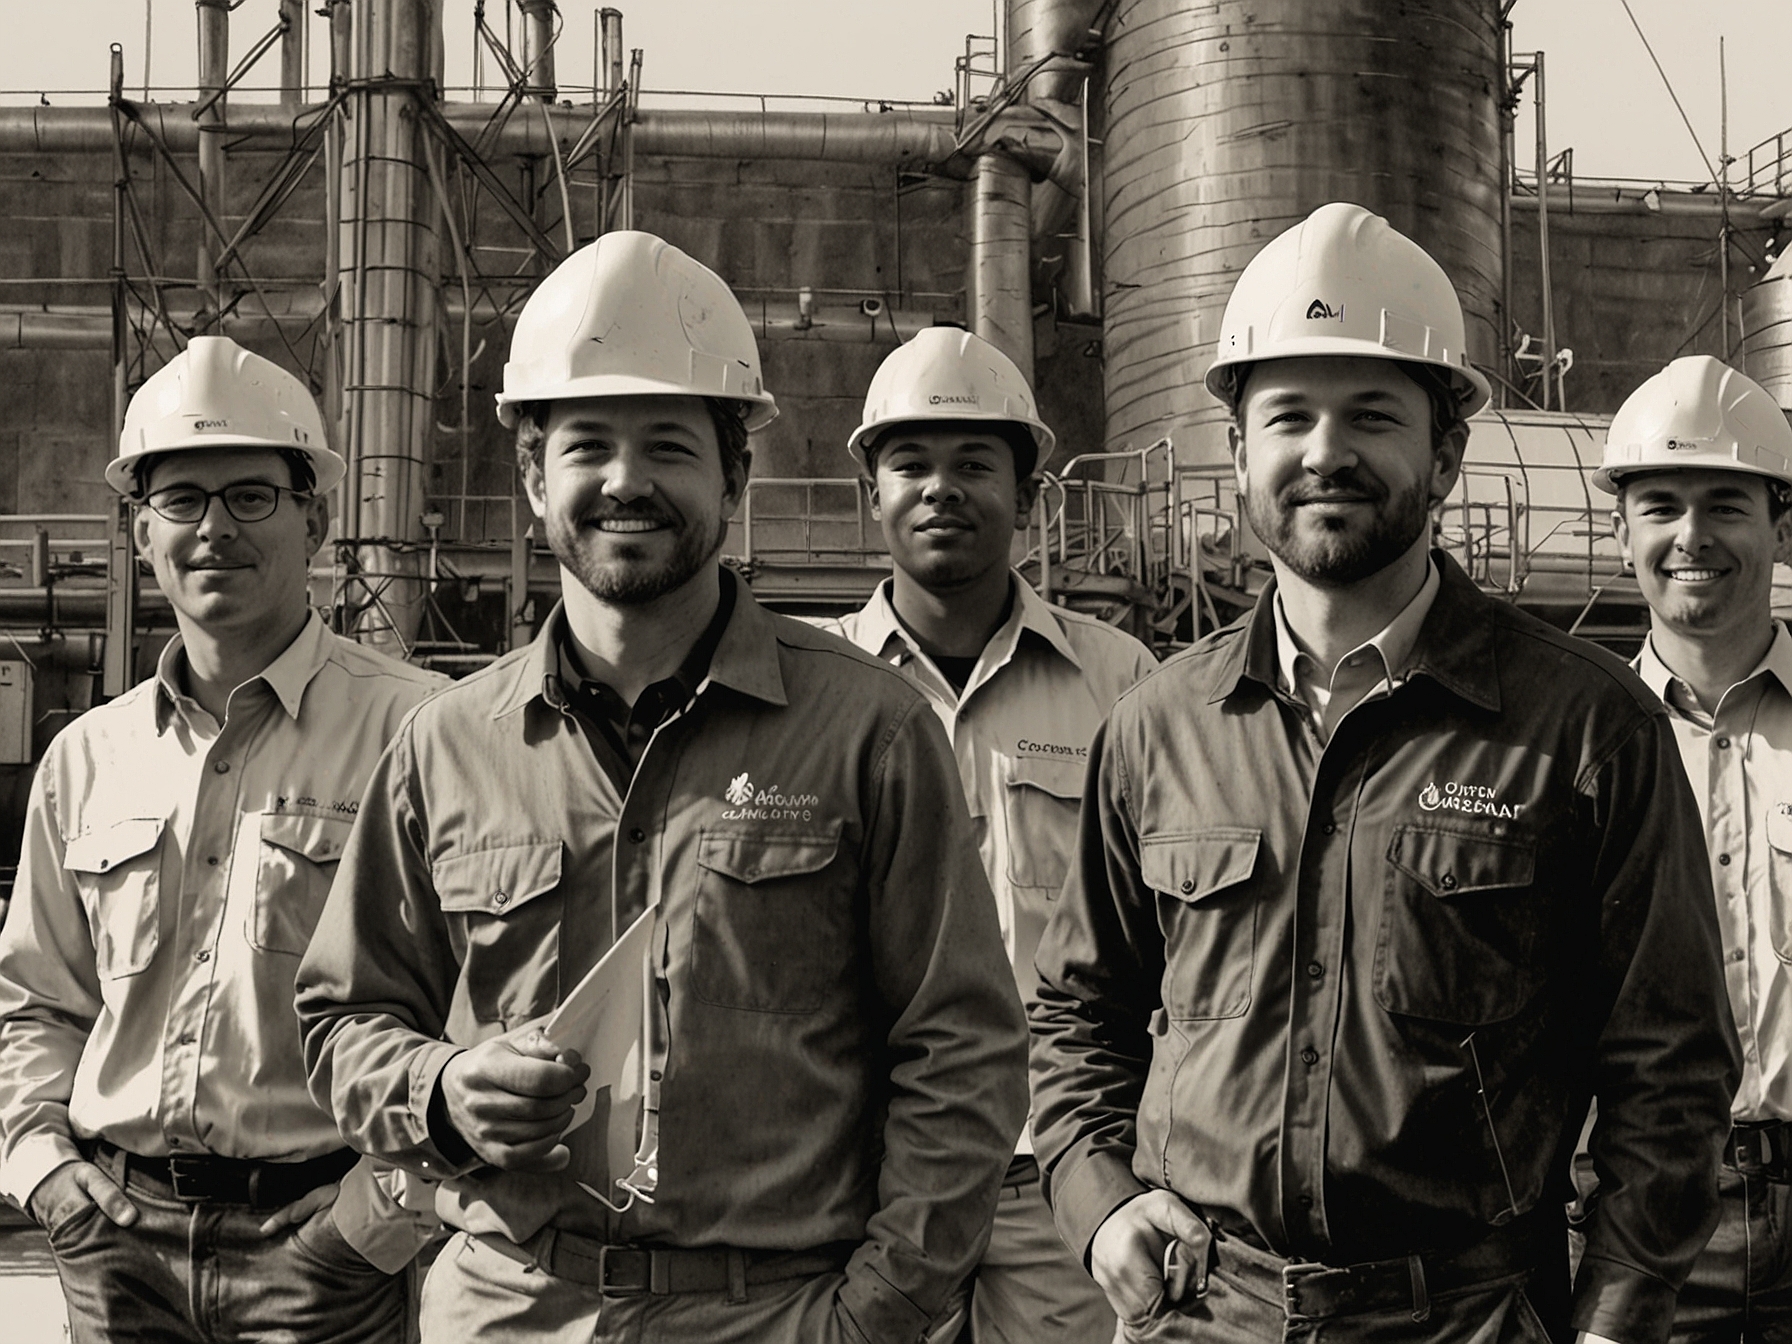 A diverse group of Canadian workers in clean energy industries, symbolizing the new sustainable jobs created under the Canadian Sustainable Jobs Act.